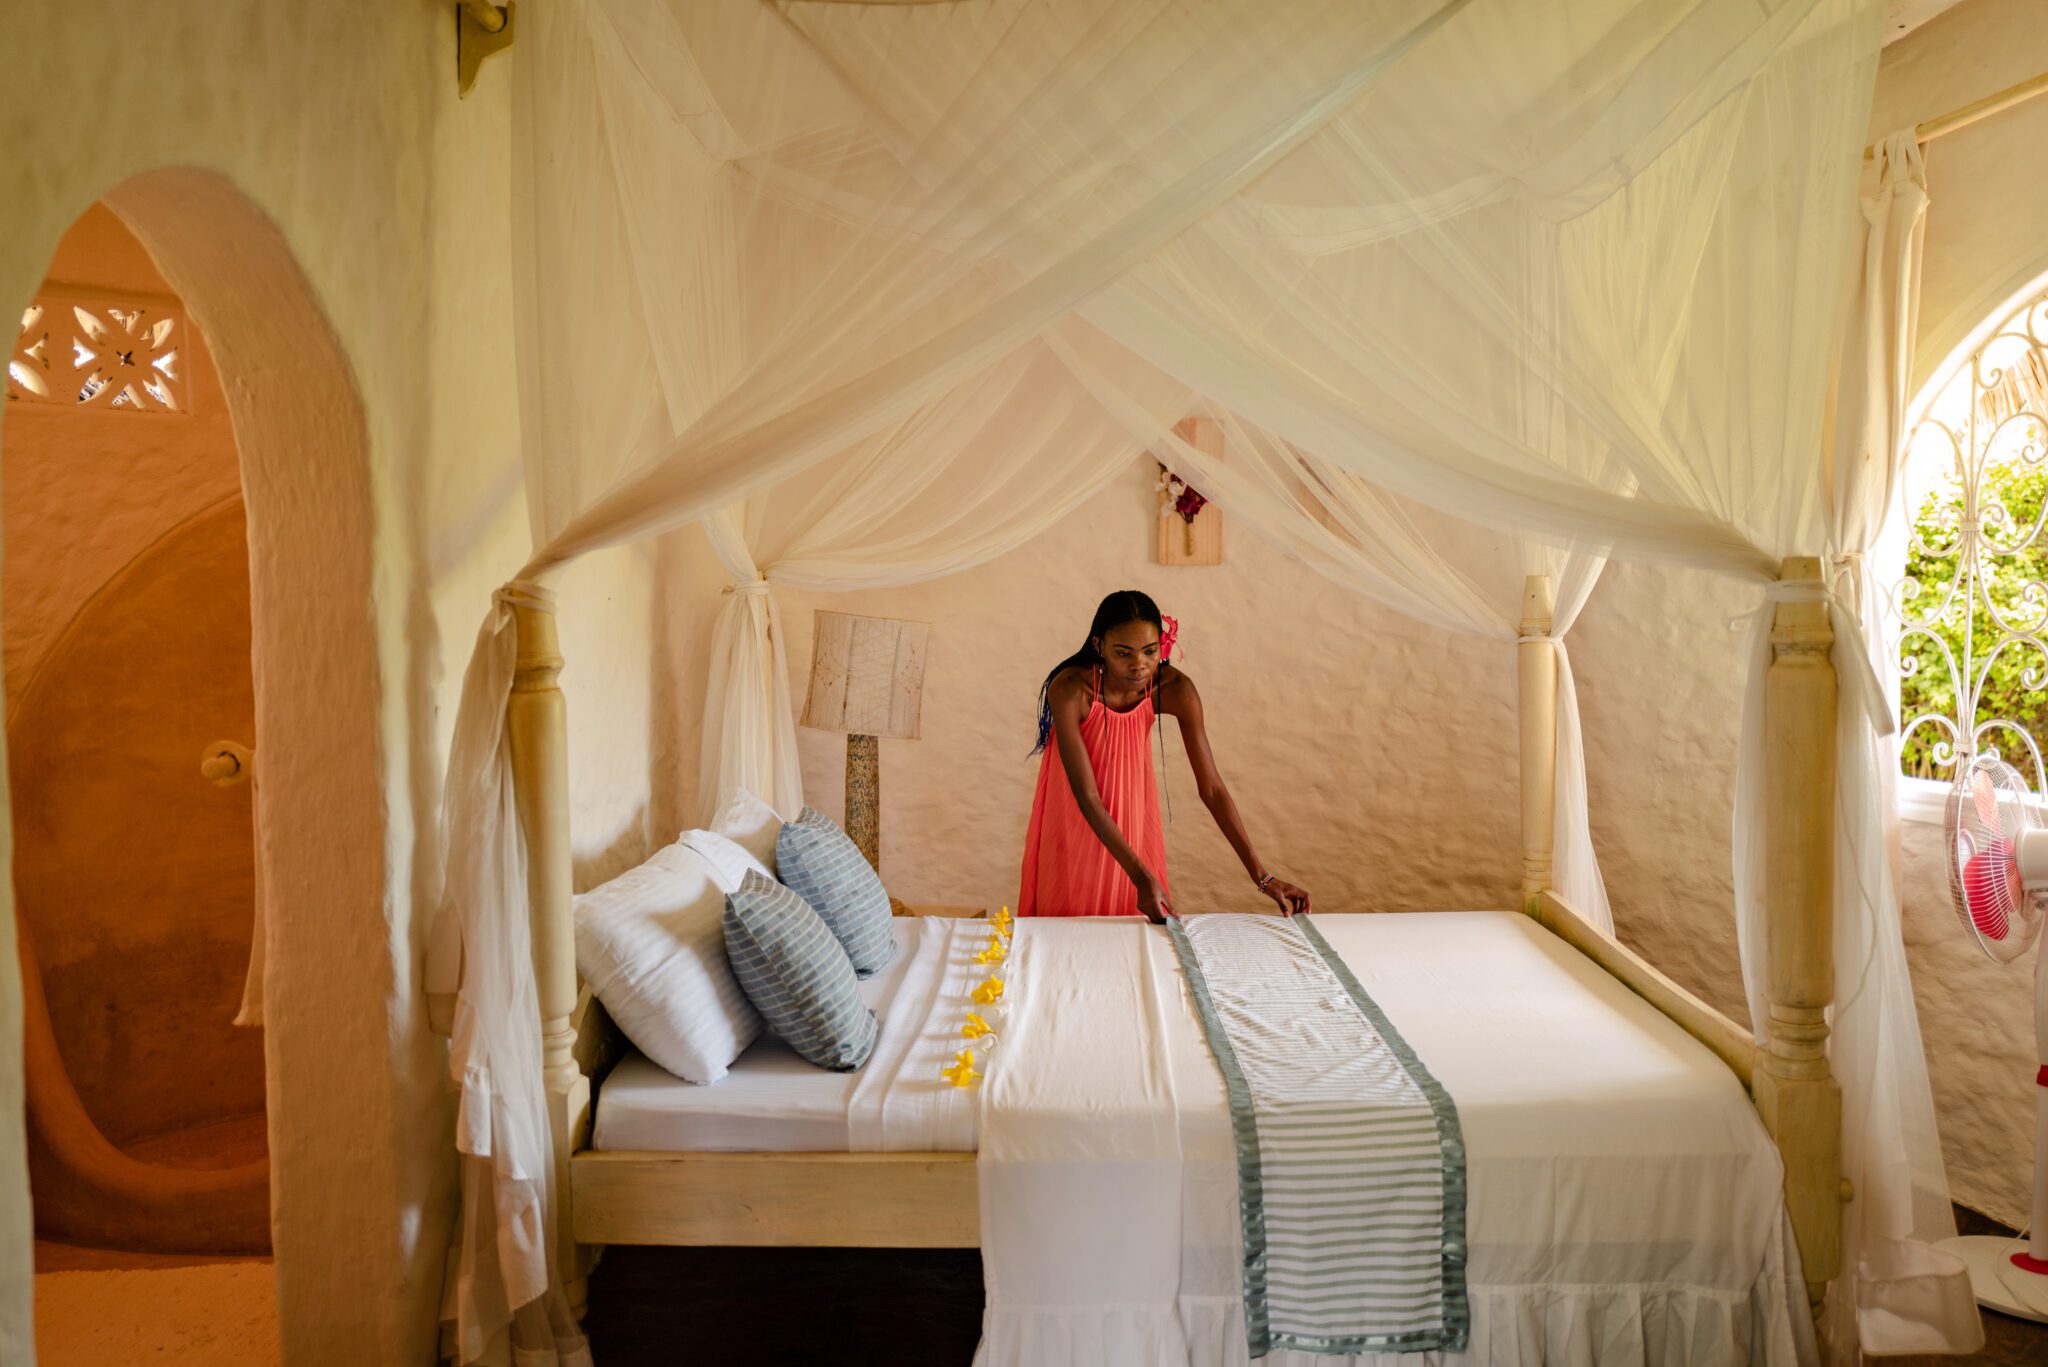 An Airbnb host in Malindi, Kenya. Adding new listings and hosts is a key focus for Airbnb. Source. Airbnb